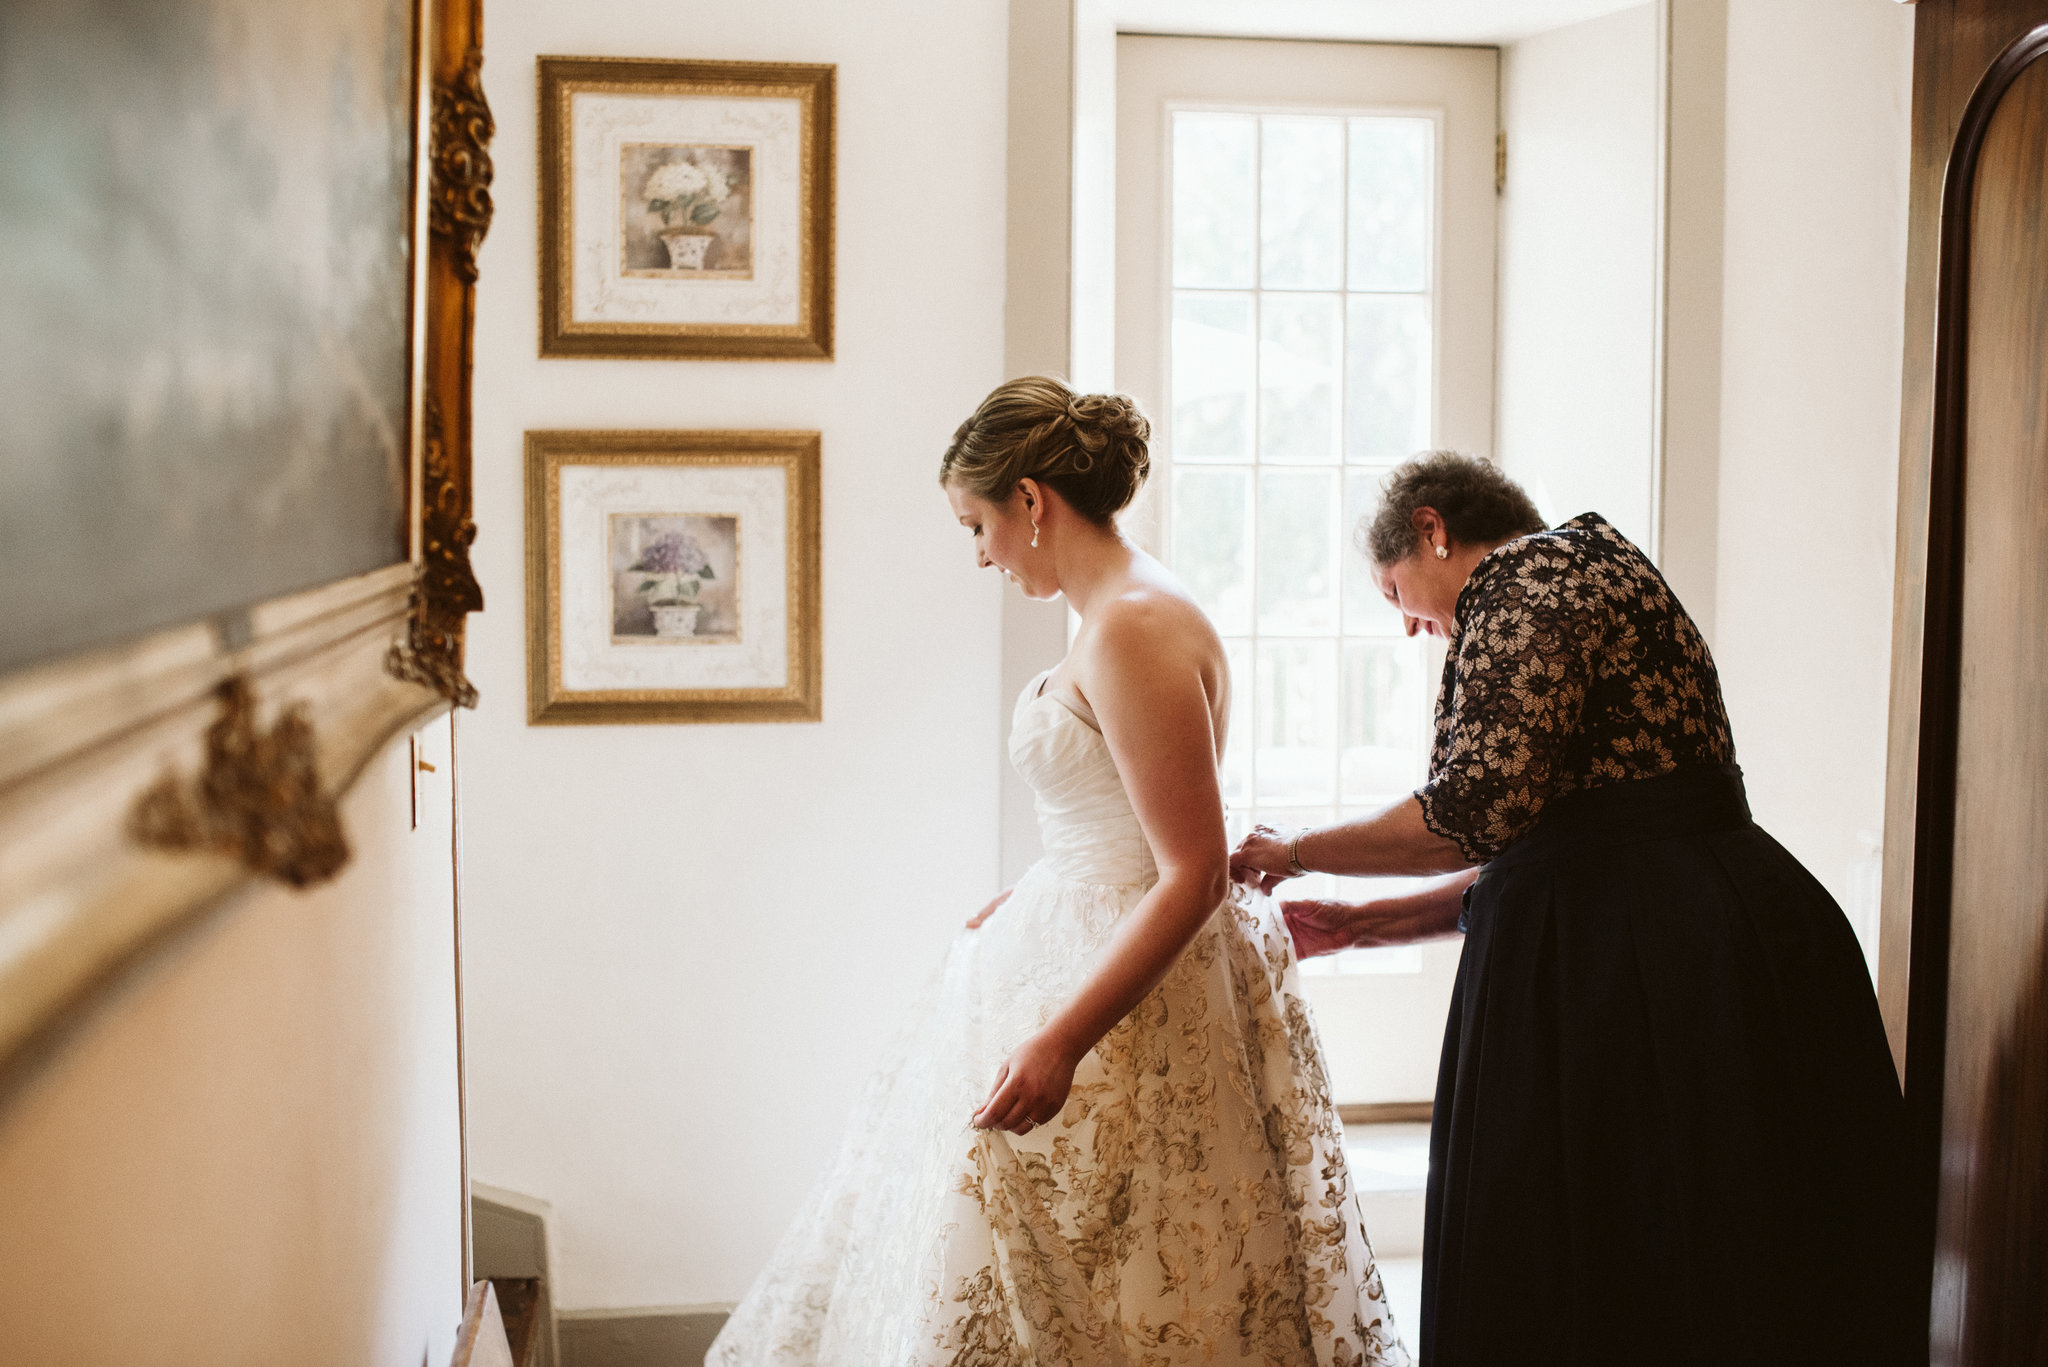  Ellicott City, Baltimore Wedding Photographer, Wayside Inn, Summer Wedding, Romantic, Traditional, Bride Getting Ready with Mother of the Bride, Matthew Christopher Wedding Gown, Allison Harper and Co Hair 